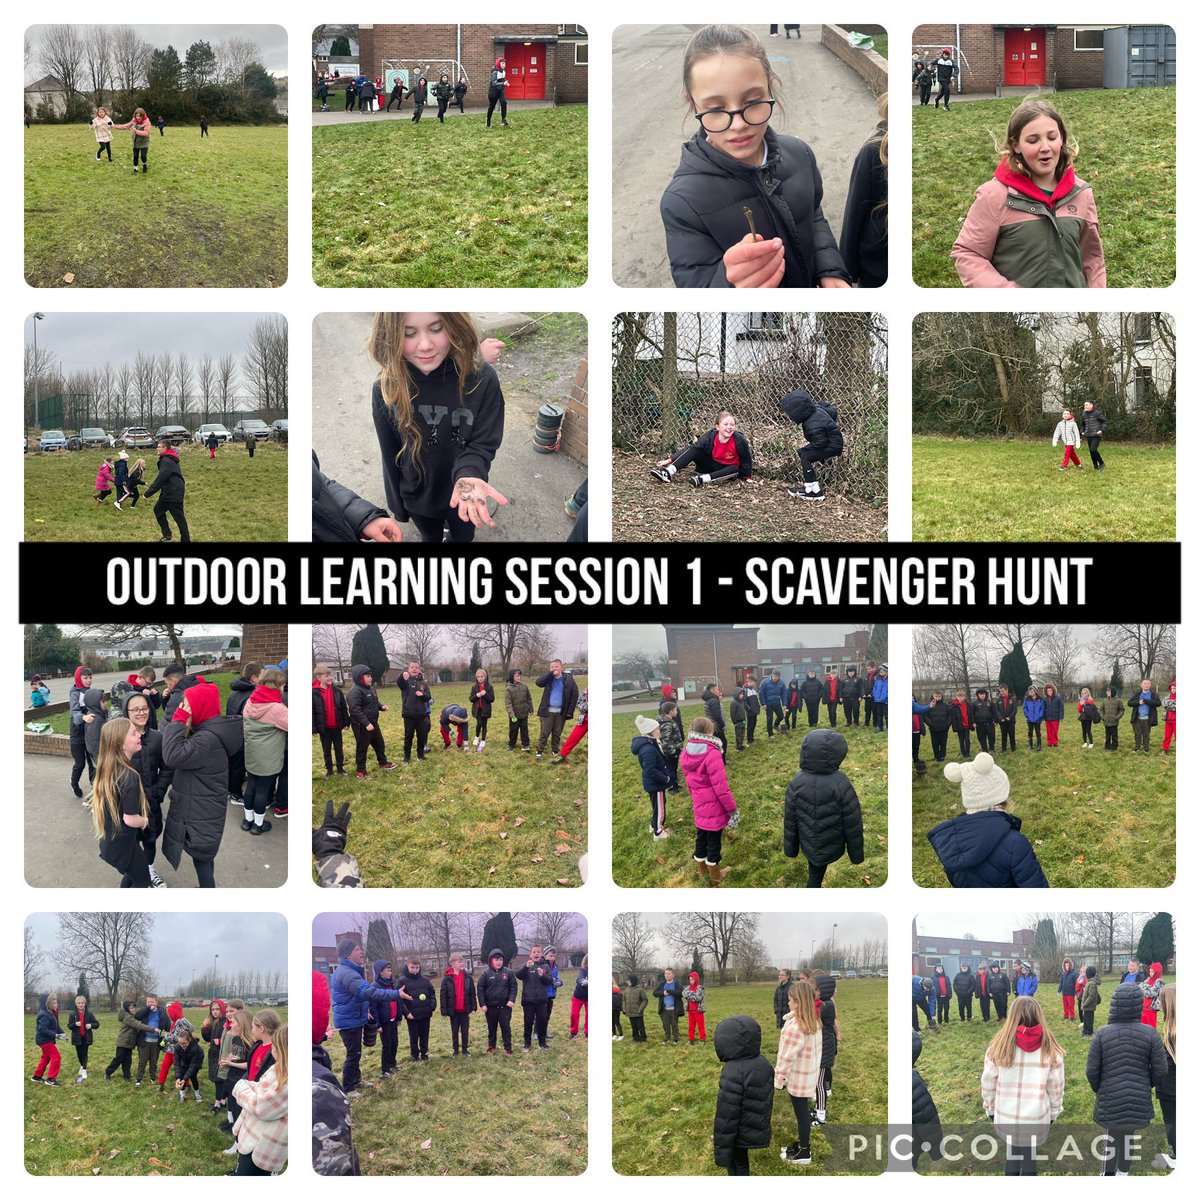 We explored the wonders of nature and searched for hidden treasures, discovering fascinating facts along the way. The scavenger hunt engaged our young minds; encouraged us to connect with the environment in a fun and educational way! @GlyncoedP #outdoorlearning #GPSREACH